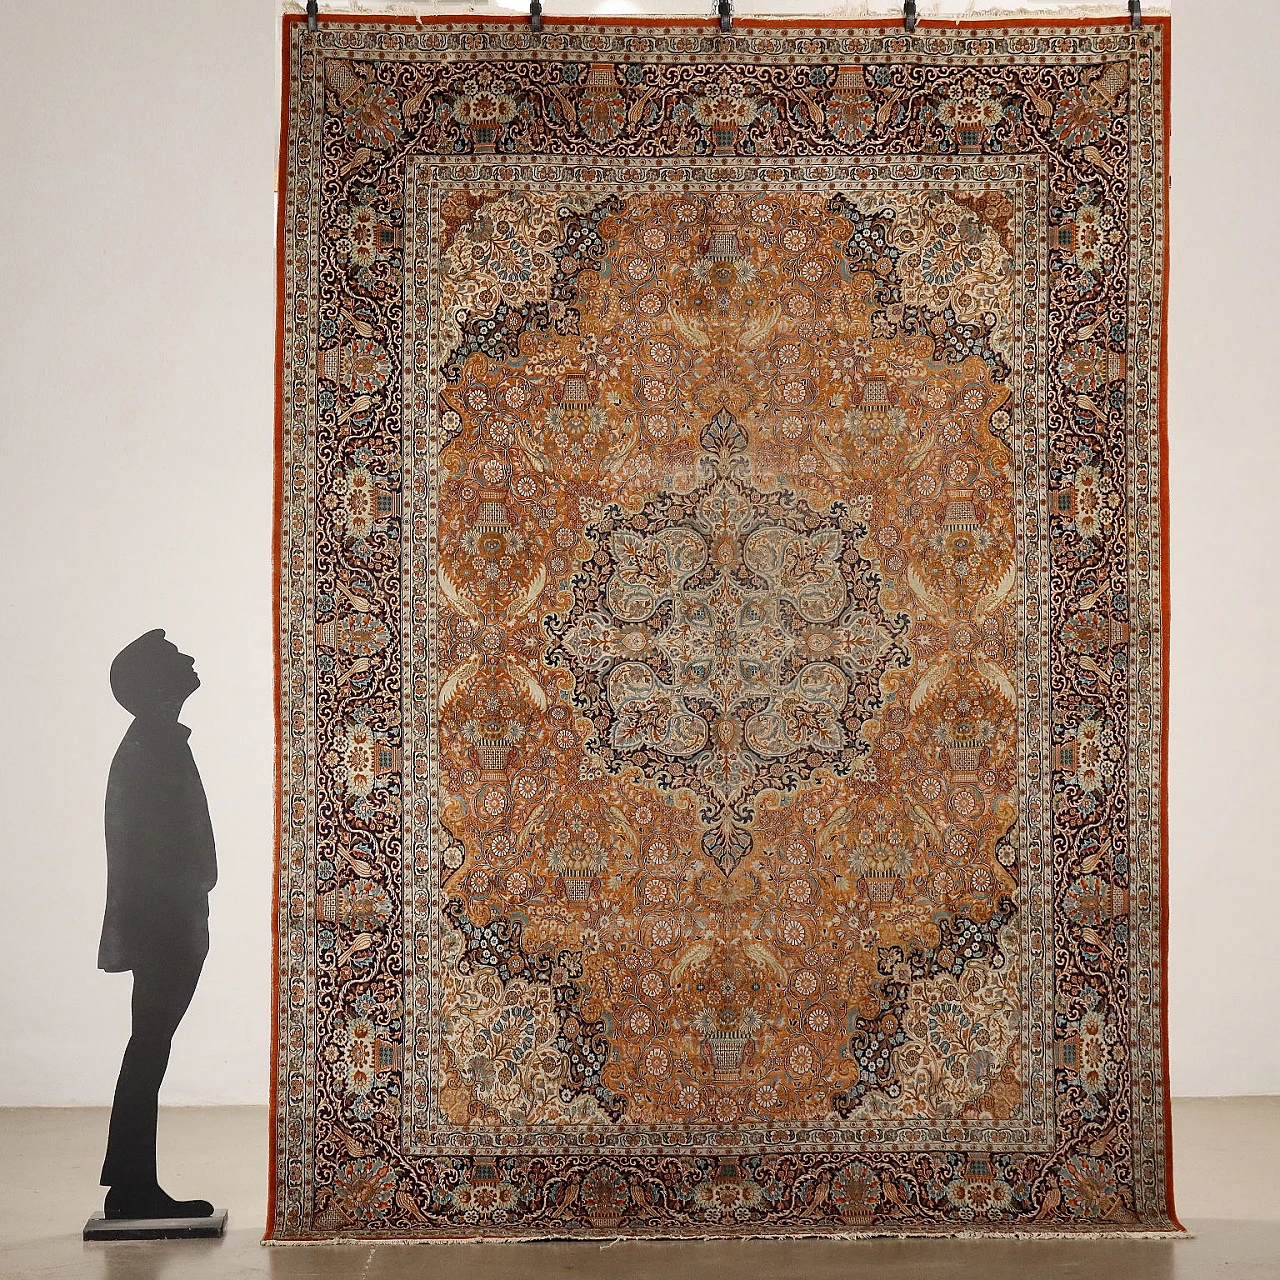 Lahore cotton, wool and silk fine-knotted rug 2